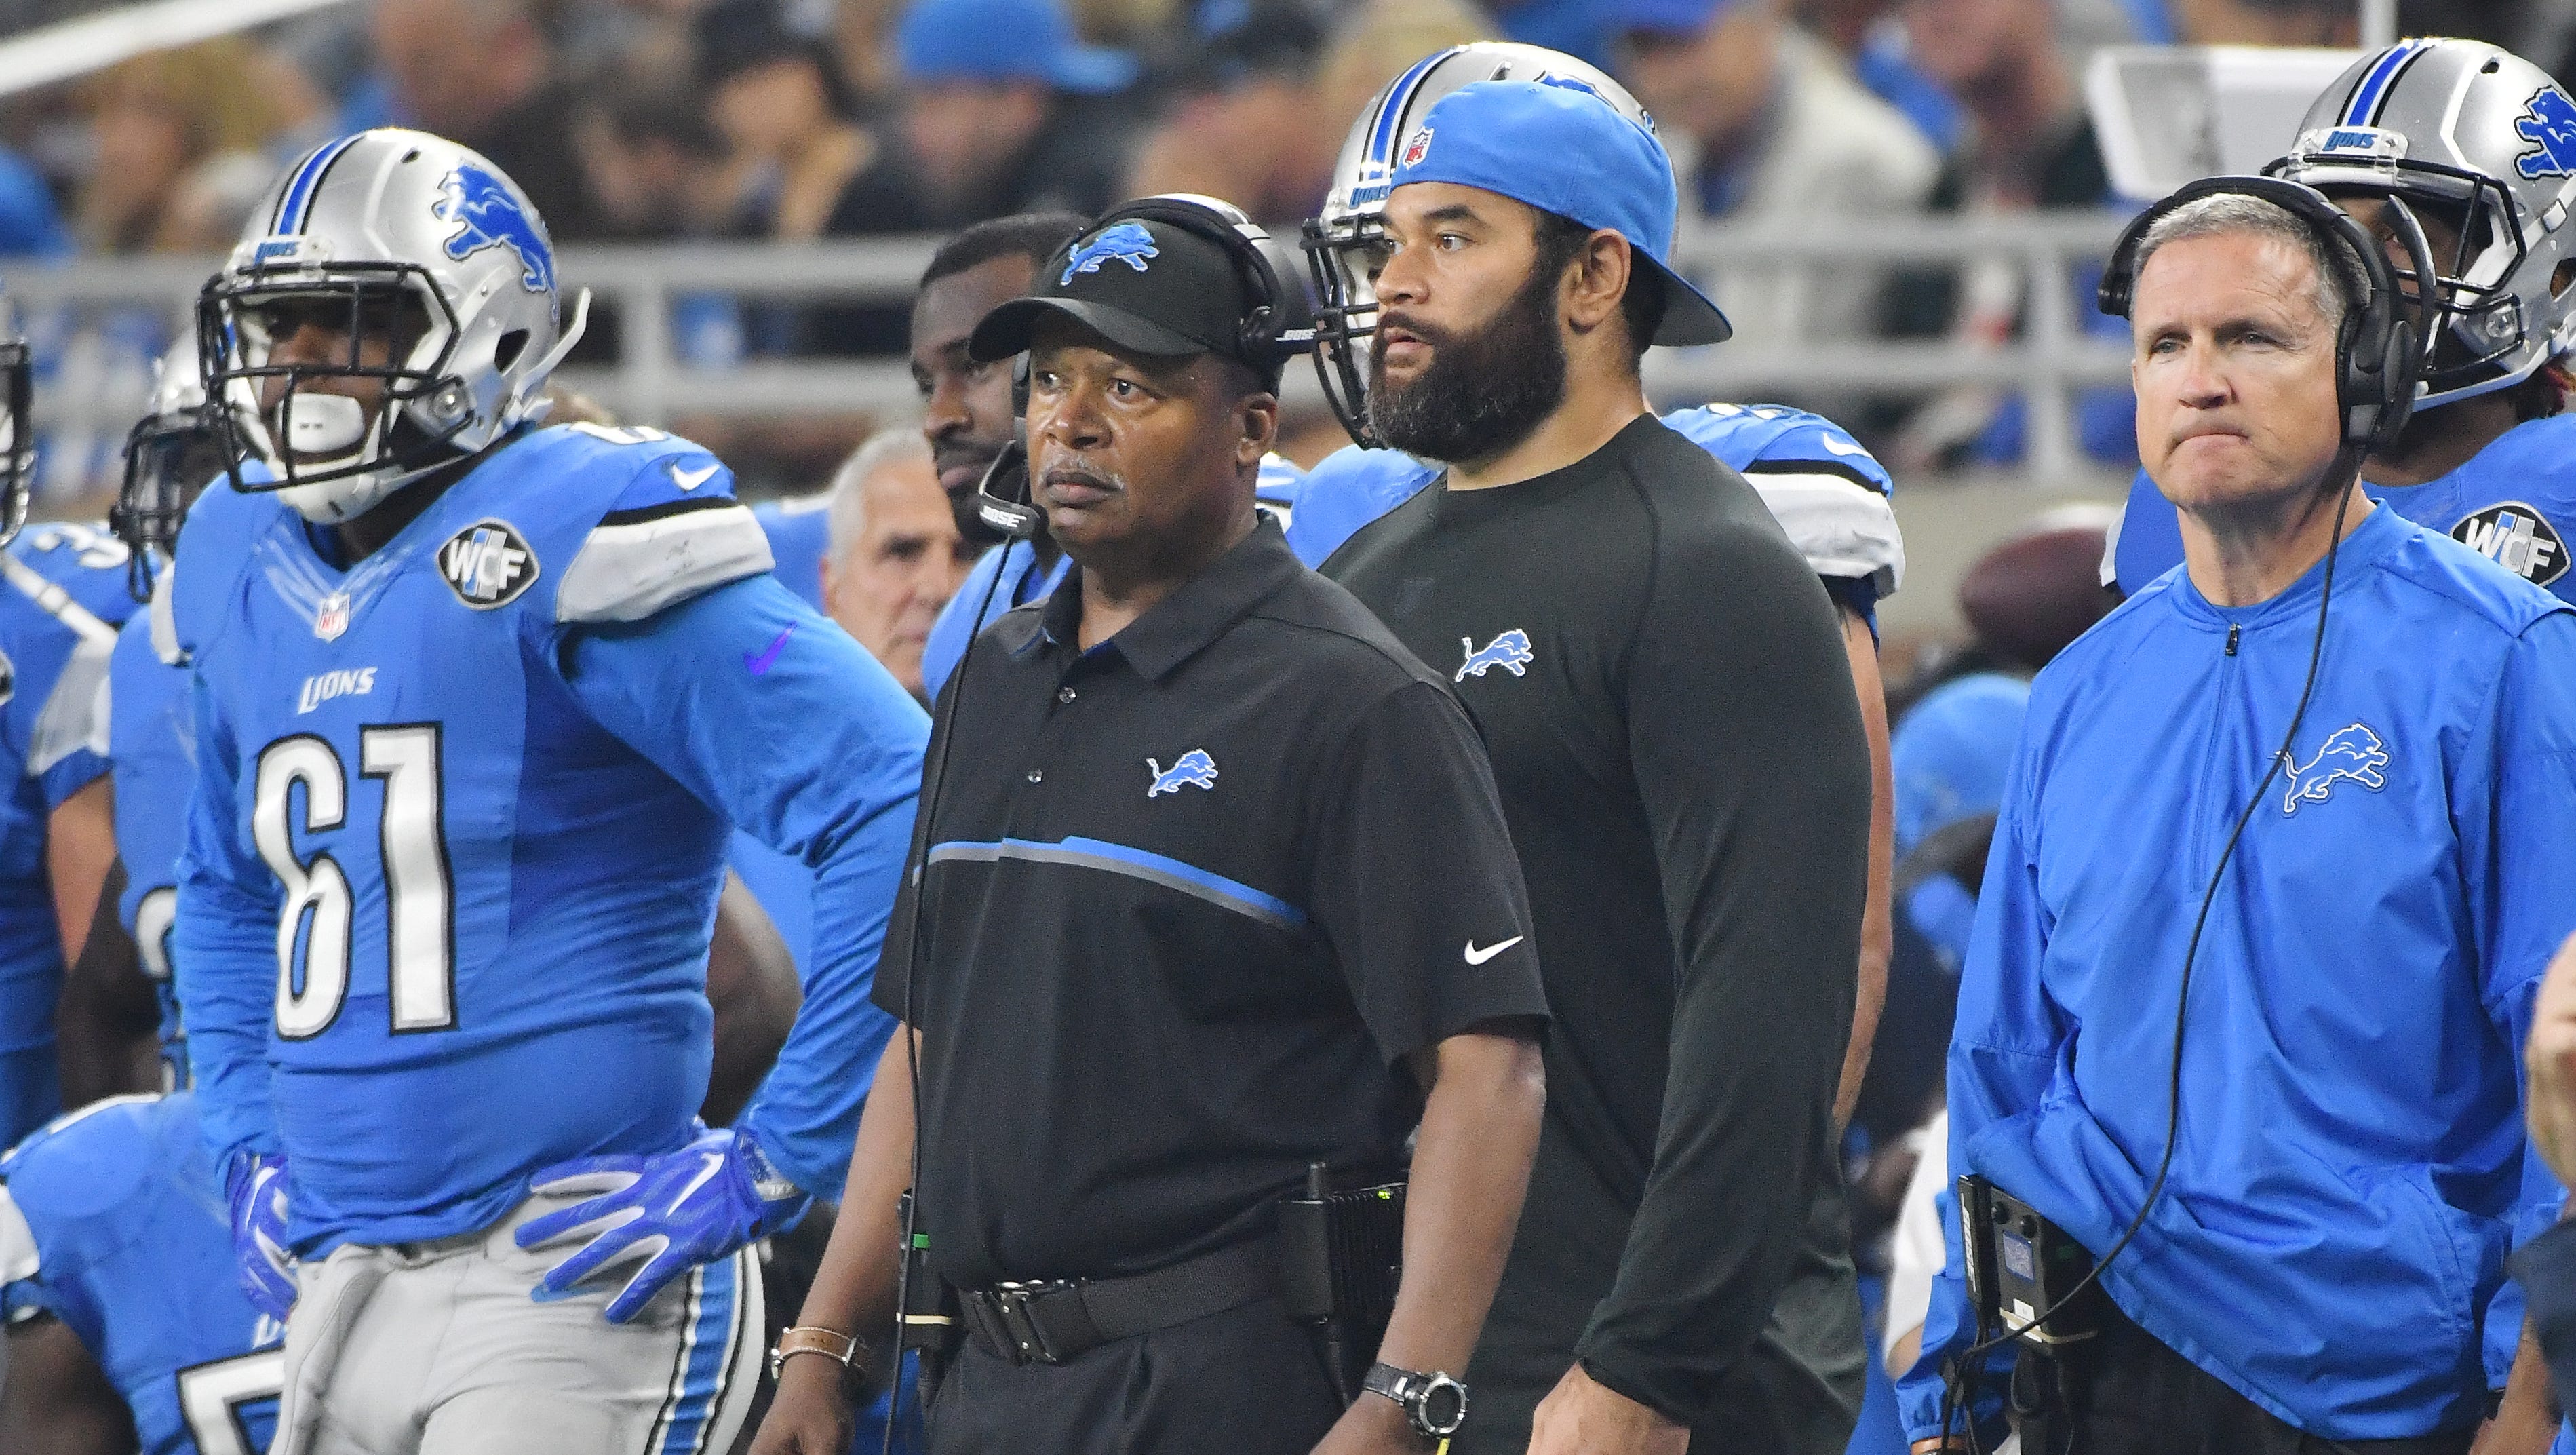 Lions head coach Jim Caldwell on the sidelines with injured defensive tackle Haloti Ngata in the first quarter.